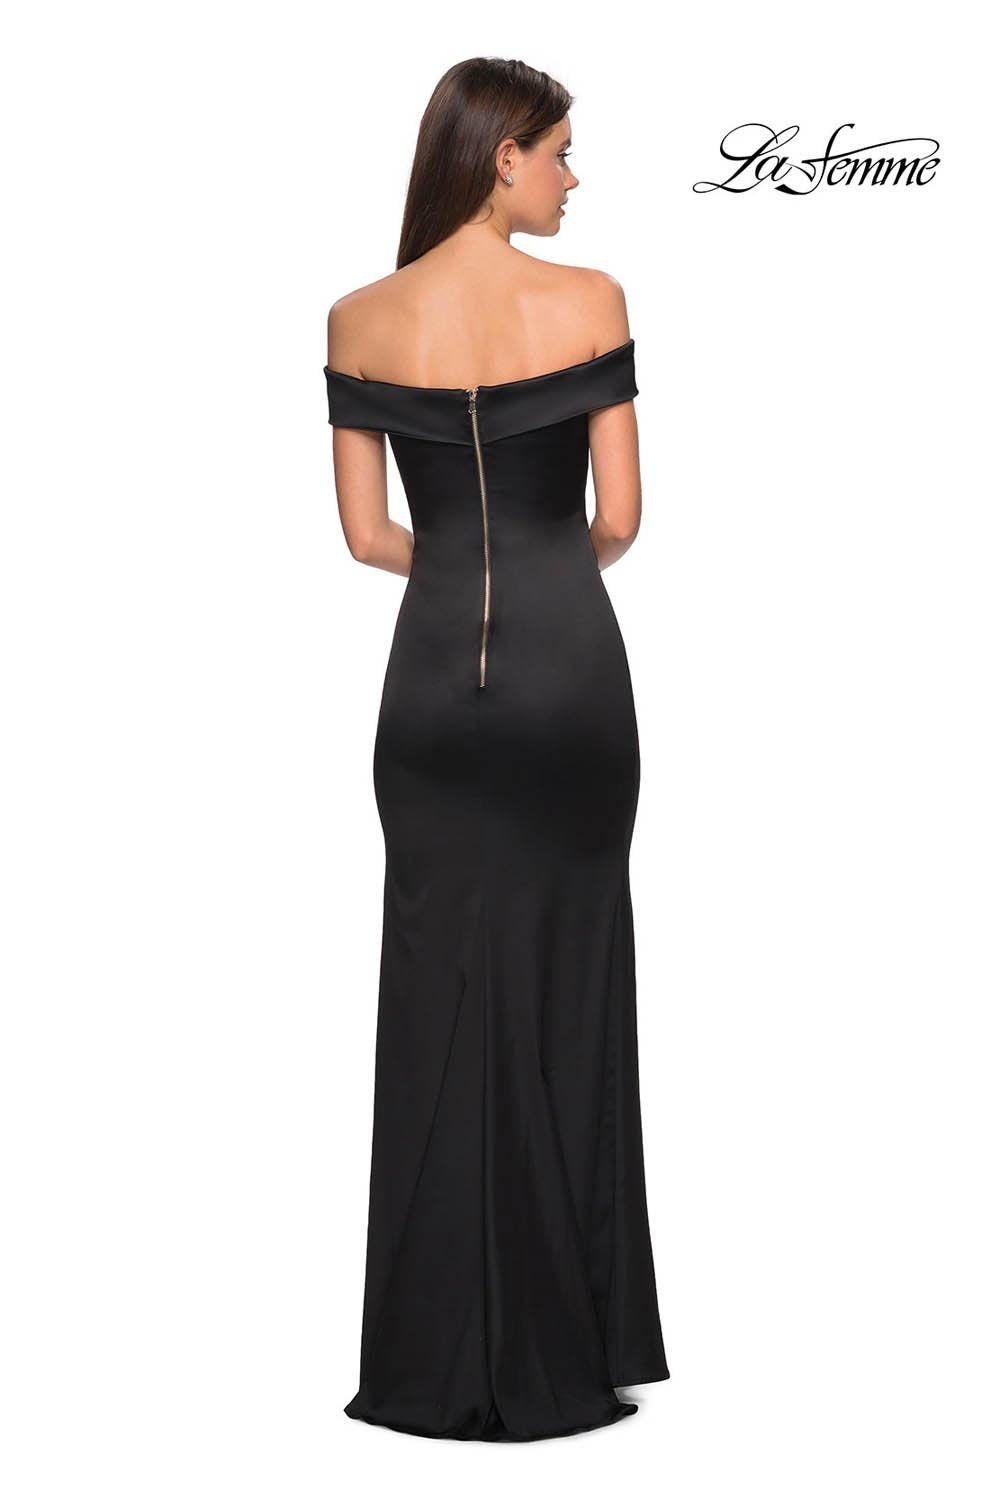 La Femme 27752 dress images in these colors: Black, Emerald, Navy, Nude, Red, Teal.